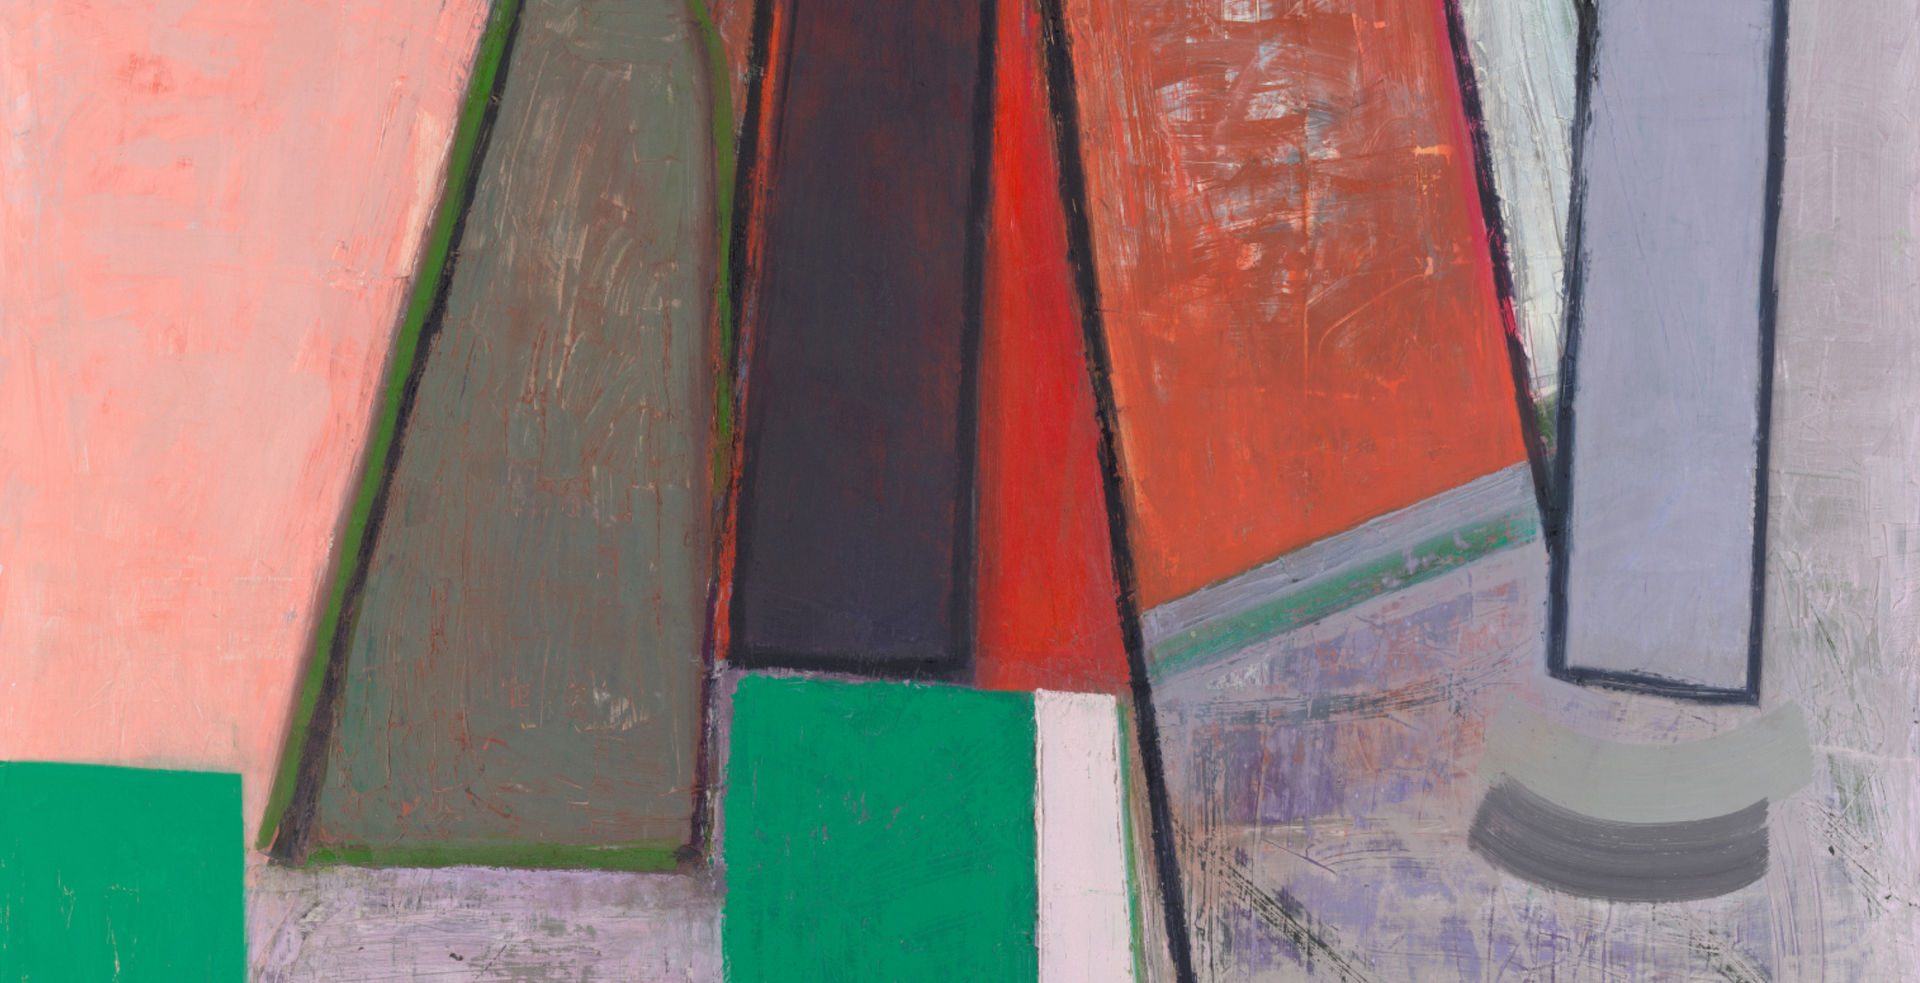 Abstract painting of rectangular blocks in green, pink, red, light purple and gray tones